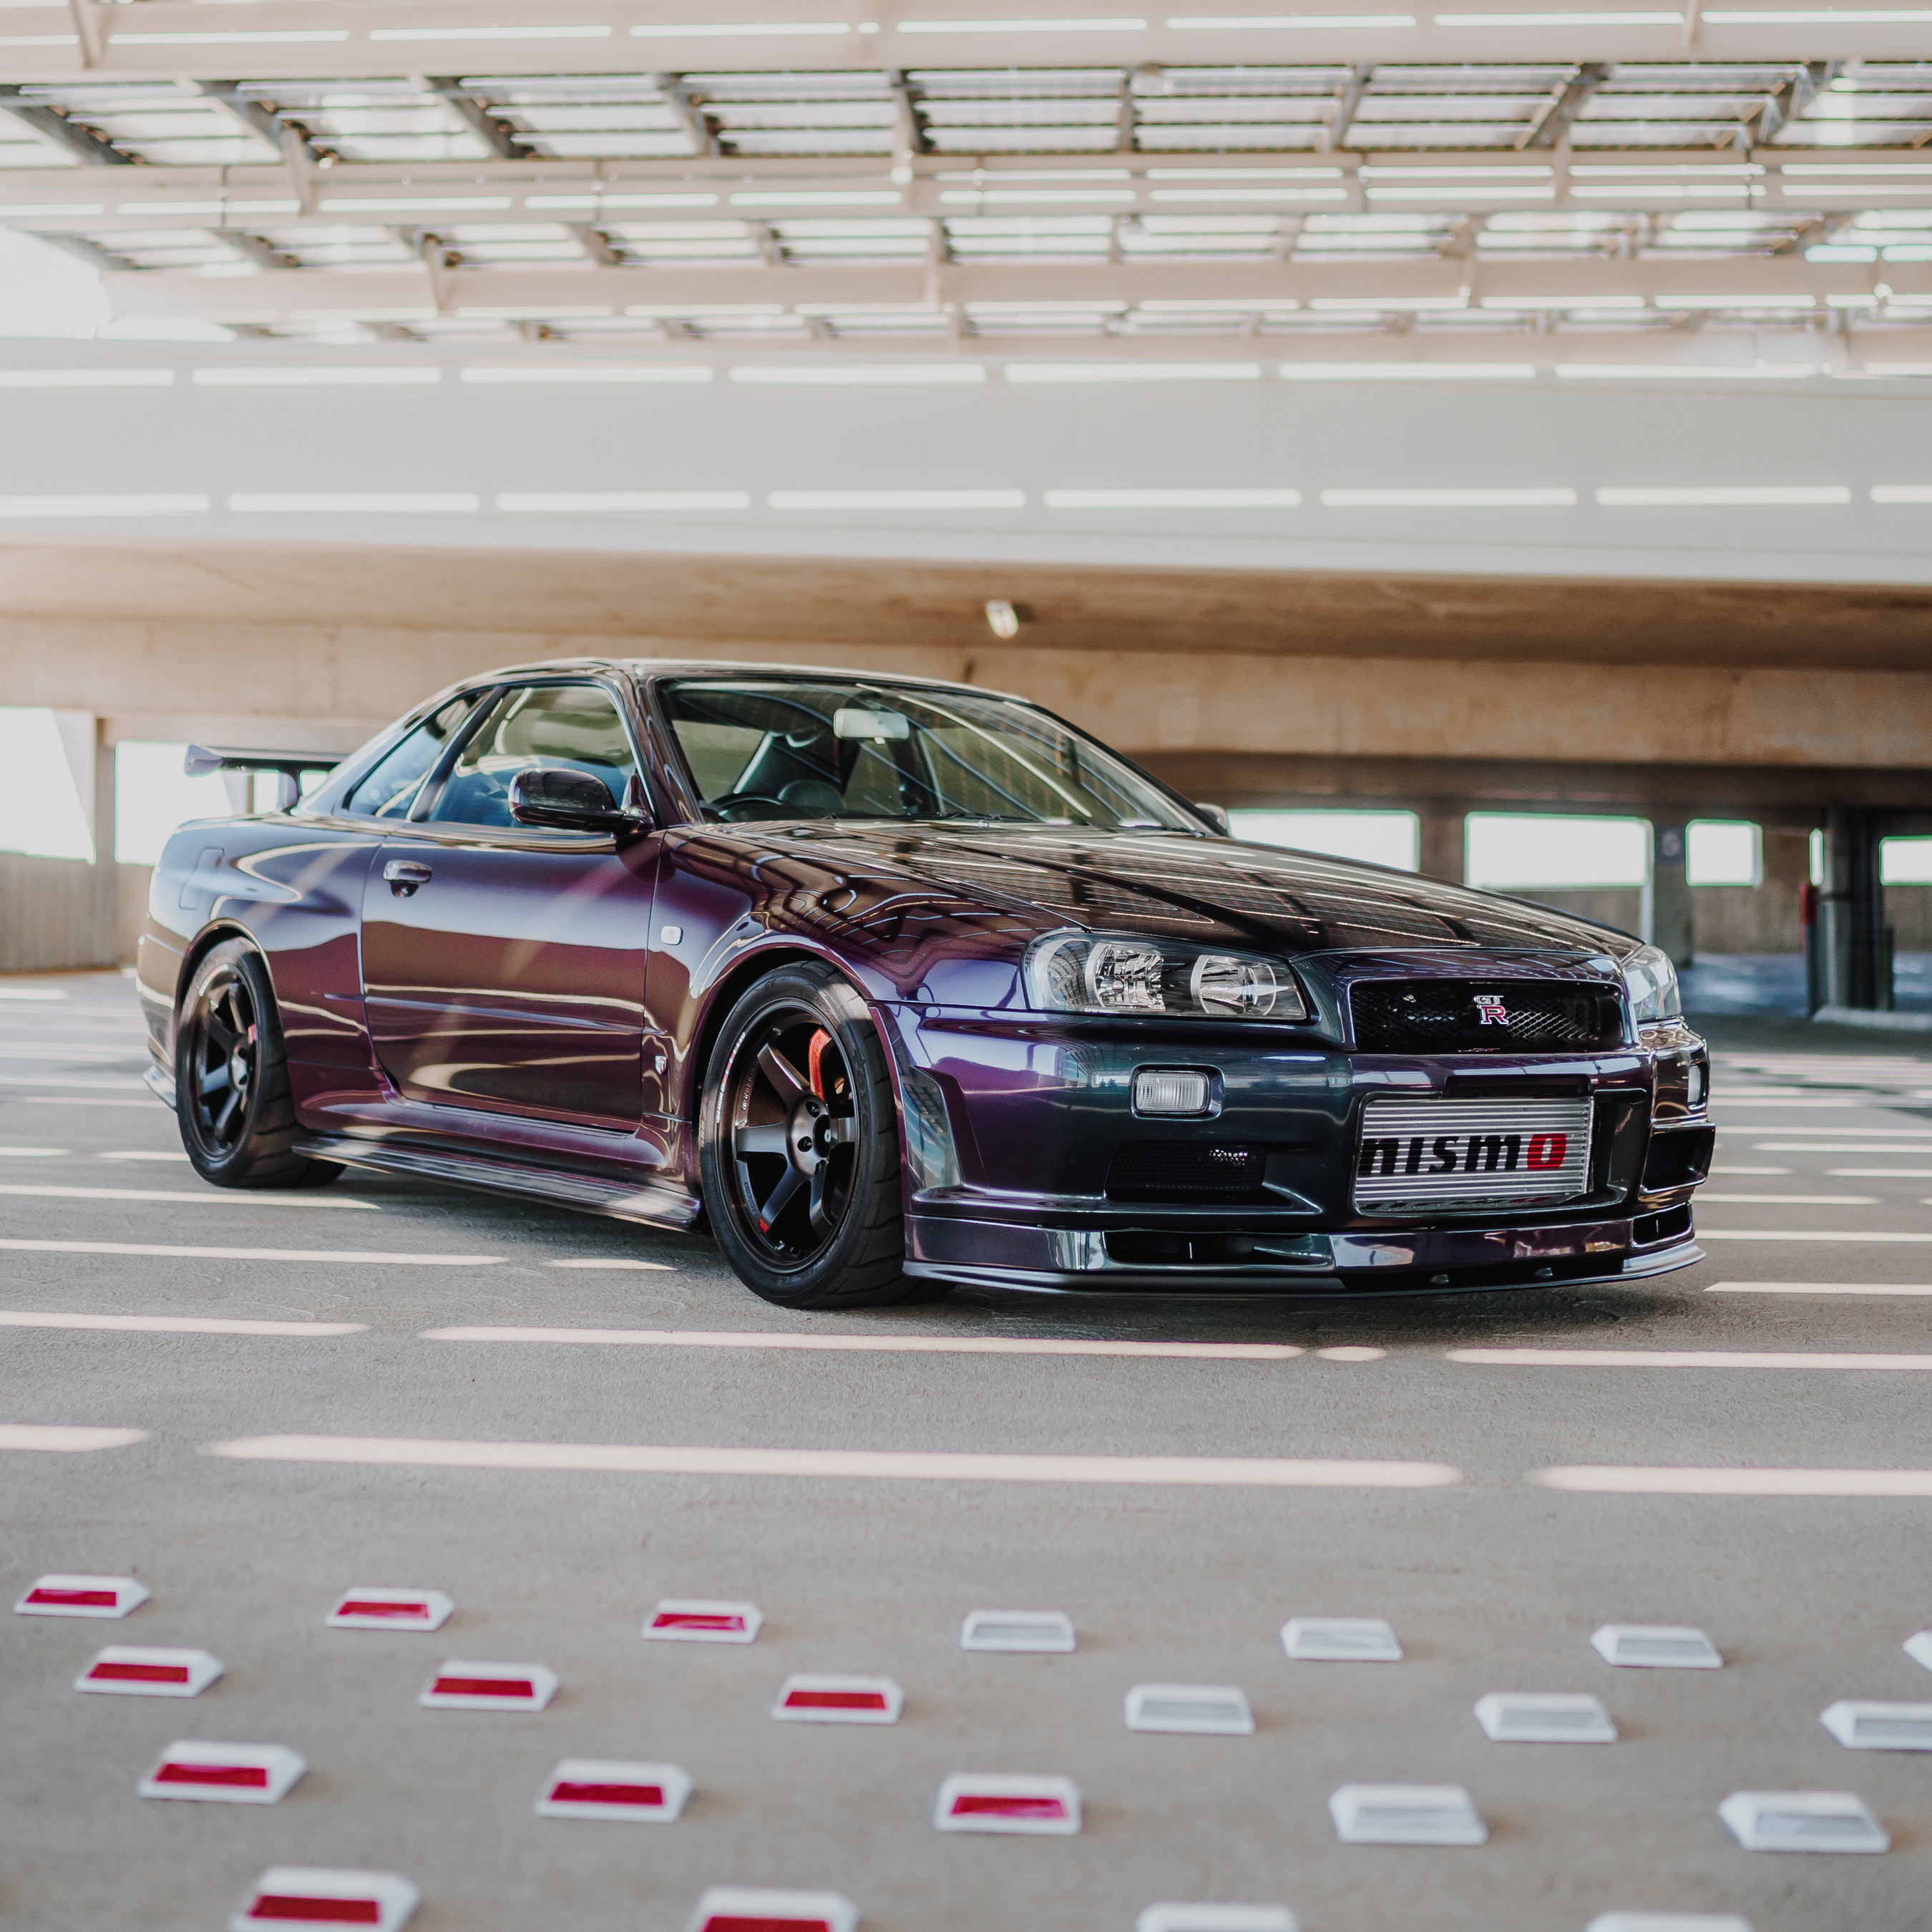 Tuner Cult Announces Winner Of Massive Cash And Car Giveaway Style Speed And Automotive Excellence Via The 1999 R34 Nissan Skyline Gt R